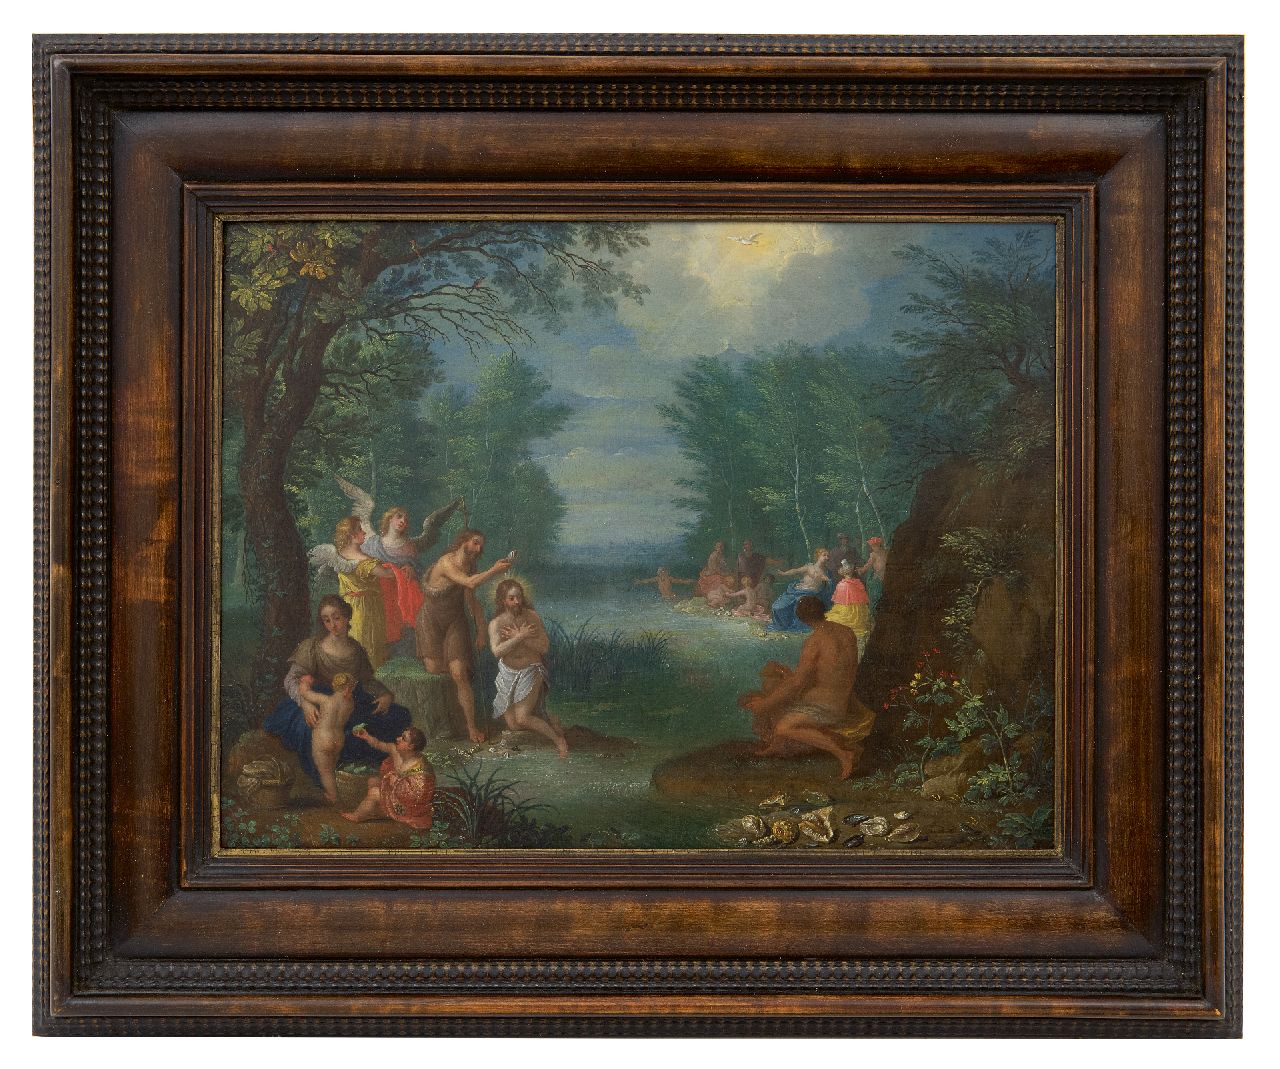 Beschey J.A.  | Jacob Andries Beschey | Paintings offered for sale | Baptism of Christ in the Jordan, oil on panel 24.3 x 31.9 cm